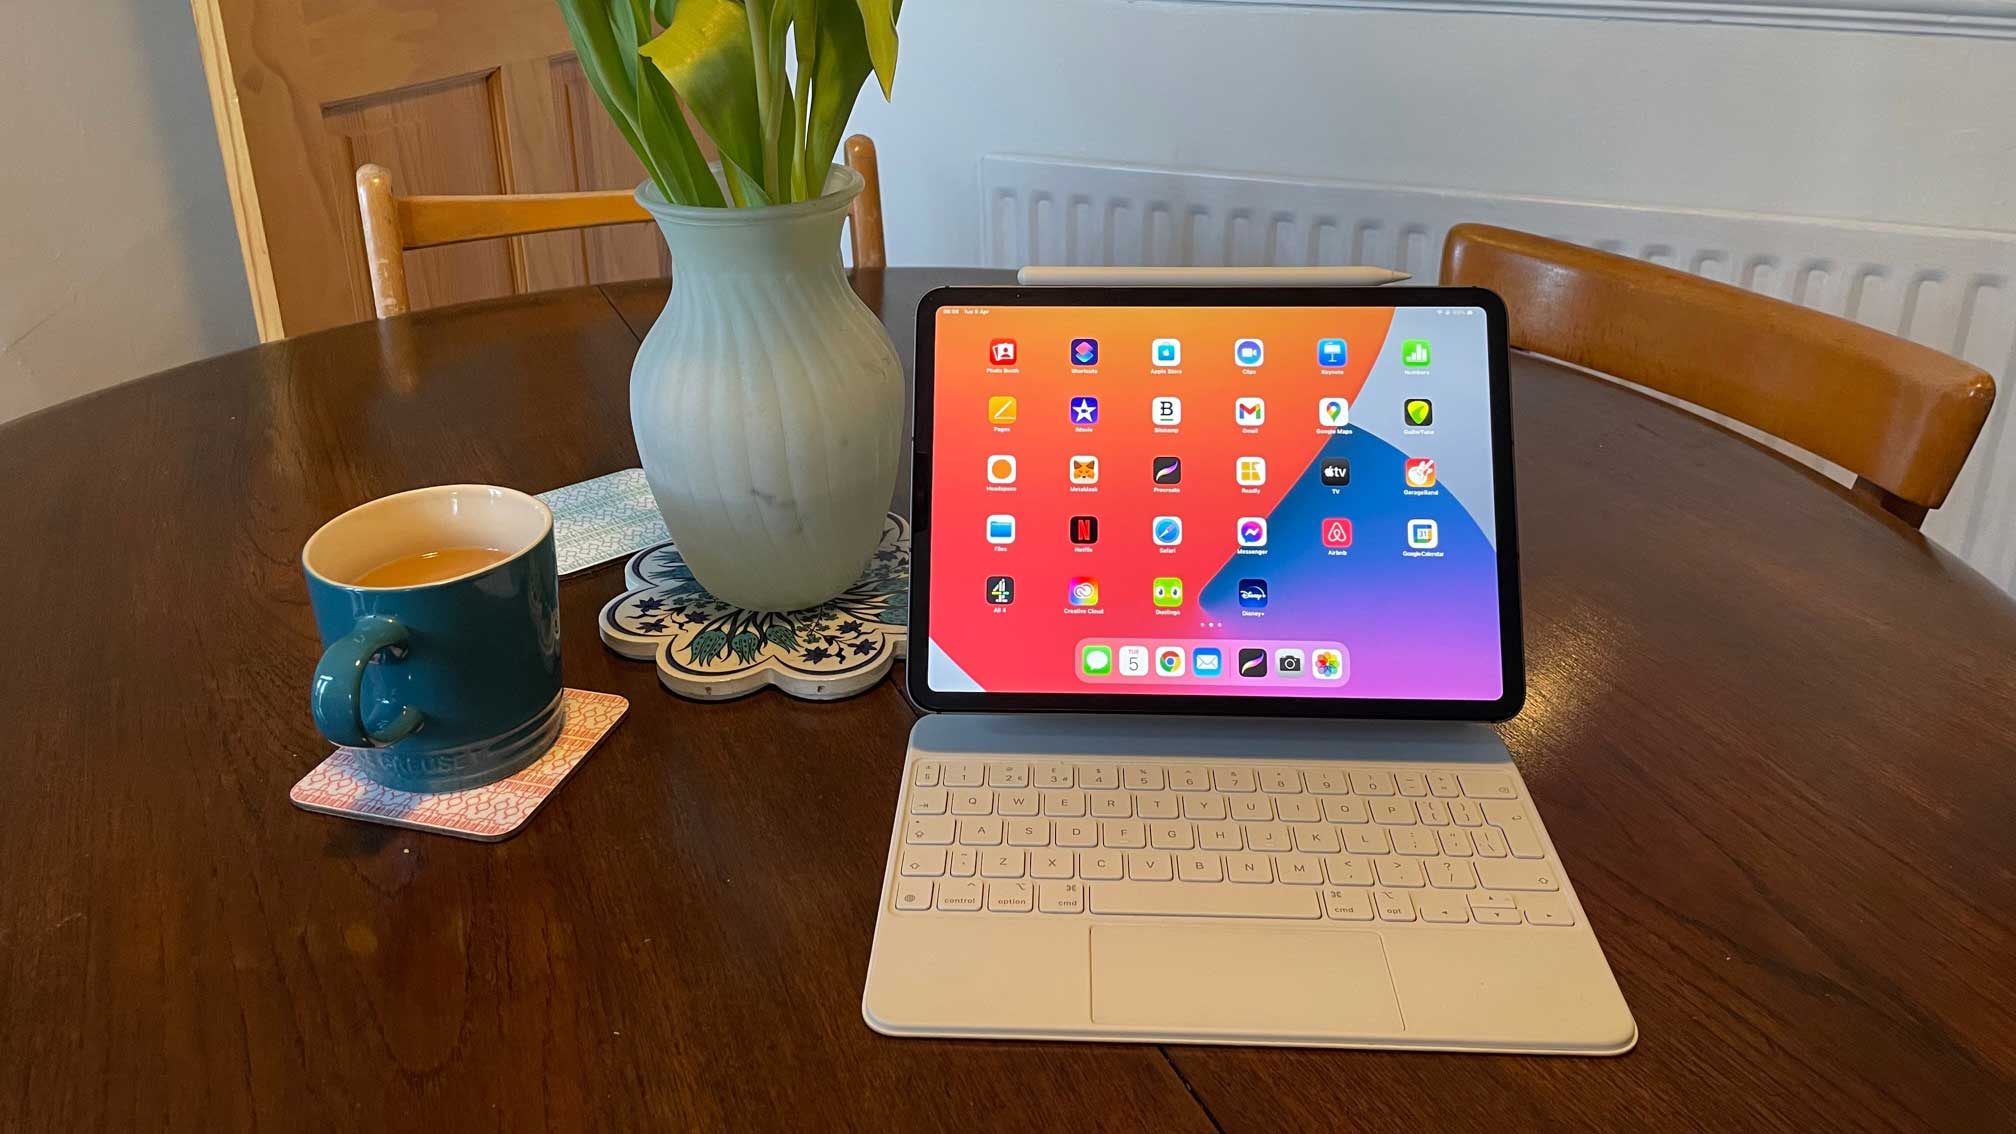 Apple's Magic Keyboard for iPad: Still Excellent, but Time for a